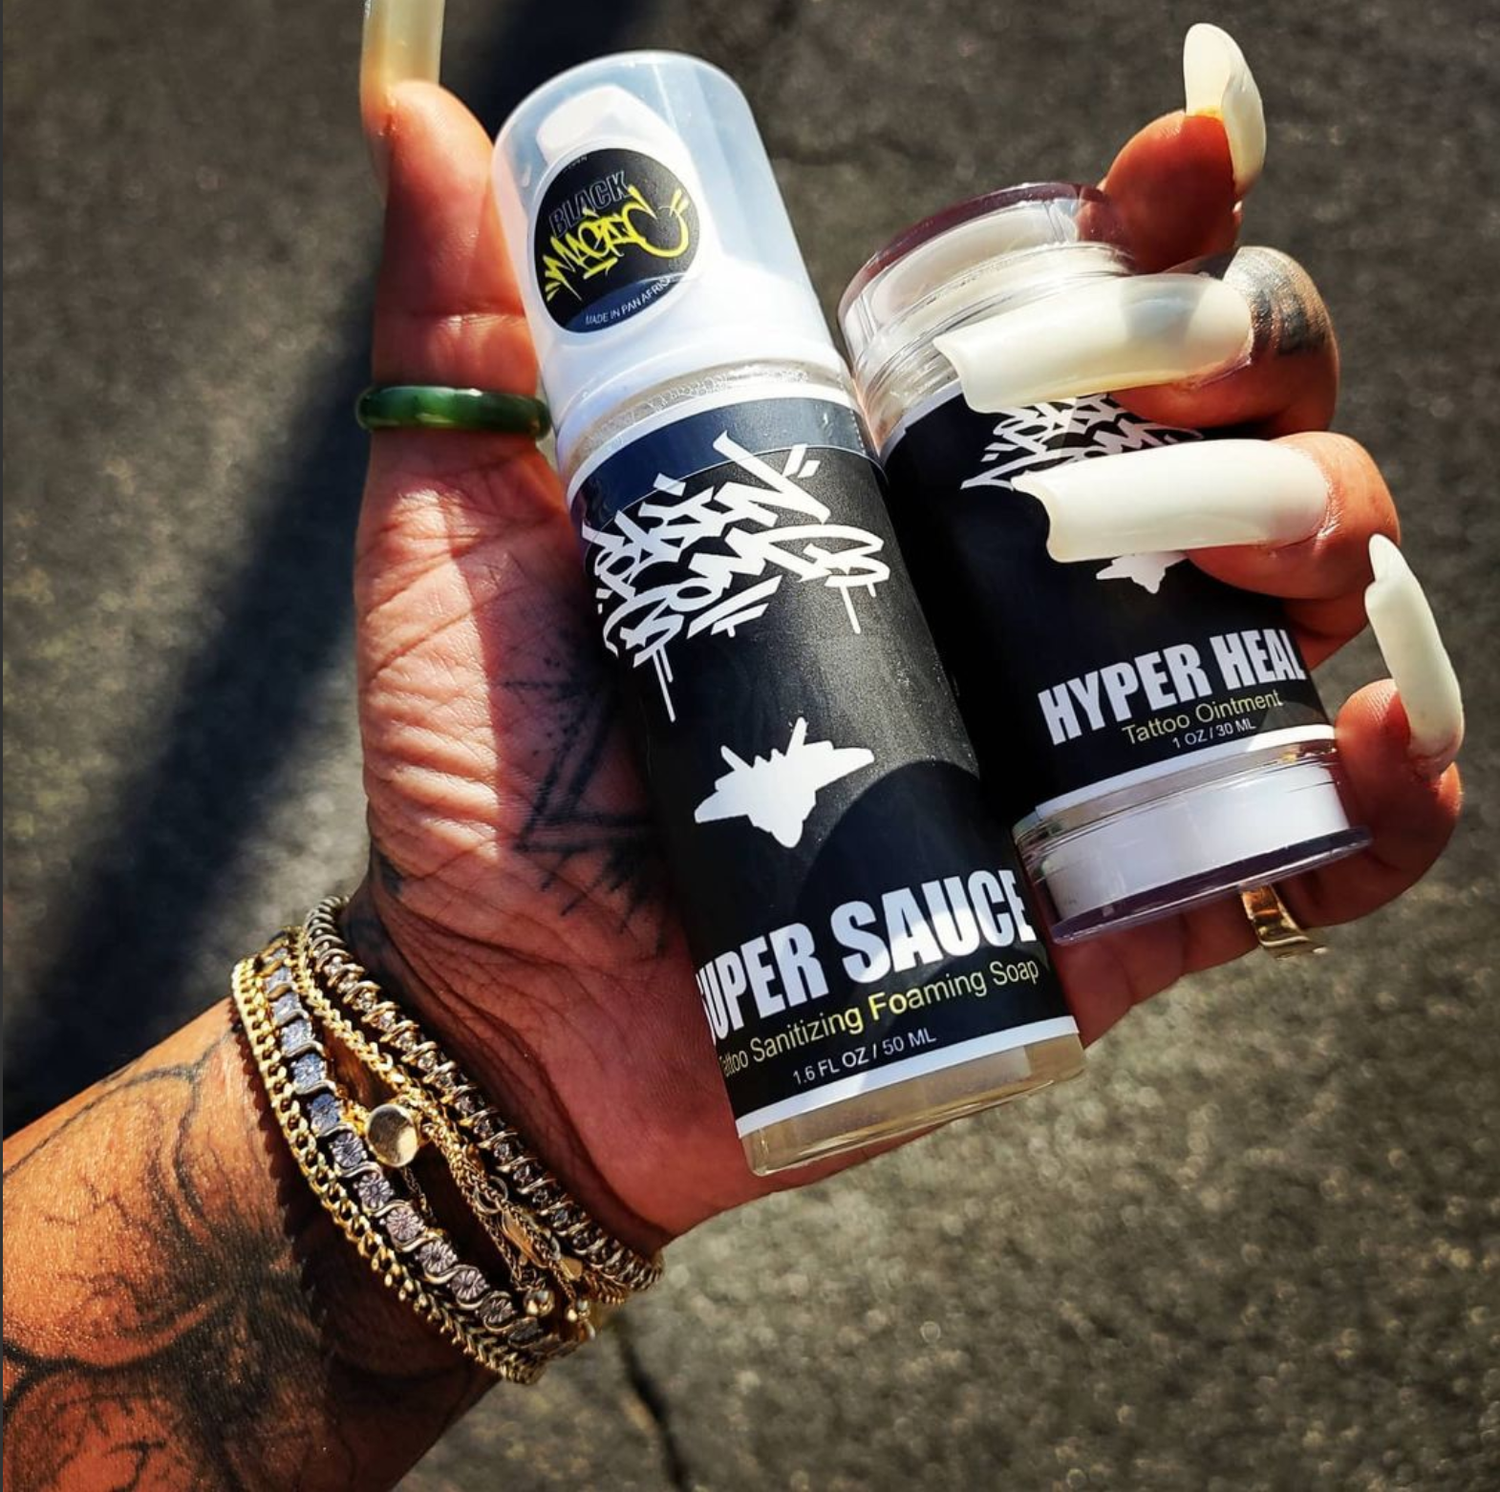 A real-world example of what you can expect when Skin Bomb tattoo aftercare is purchased. In hand example of sleek and super convenient design is perfect for people on the go, traveling or at home. Super Sauce and Hyper Heal. 